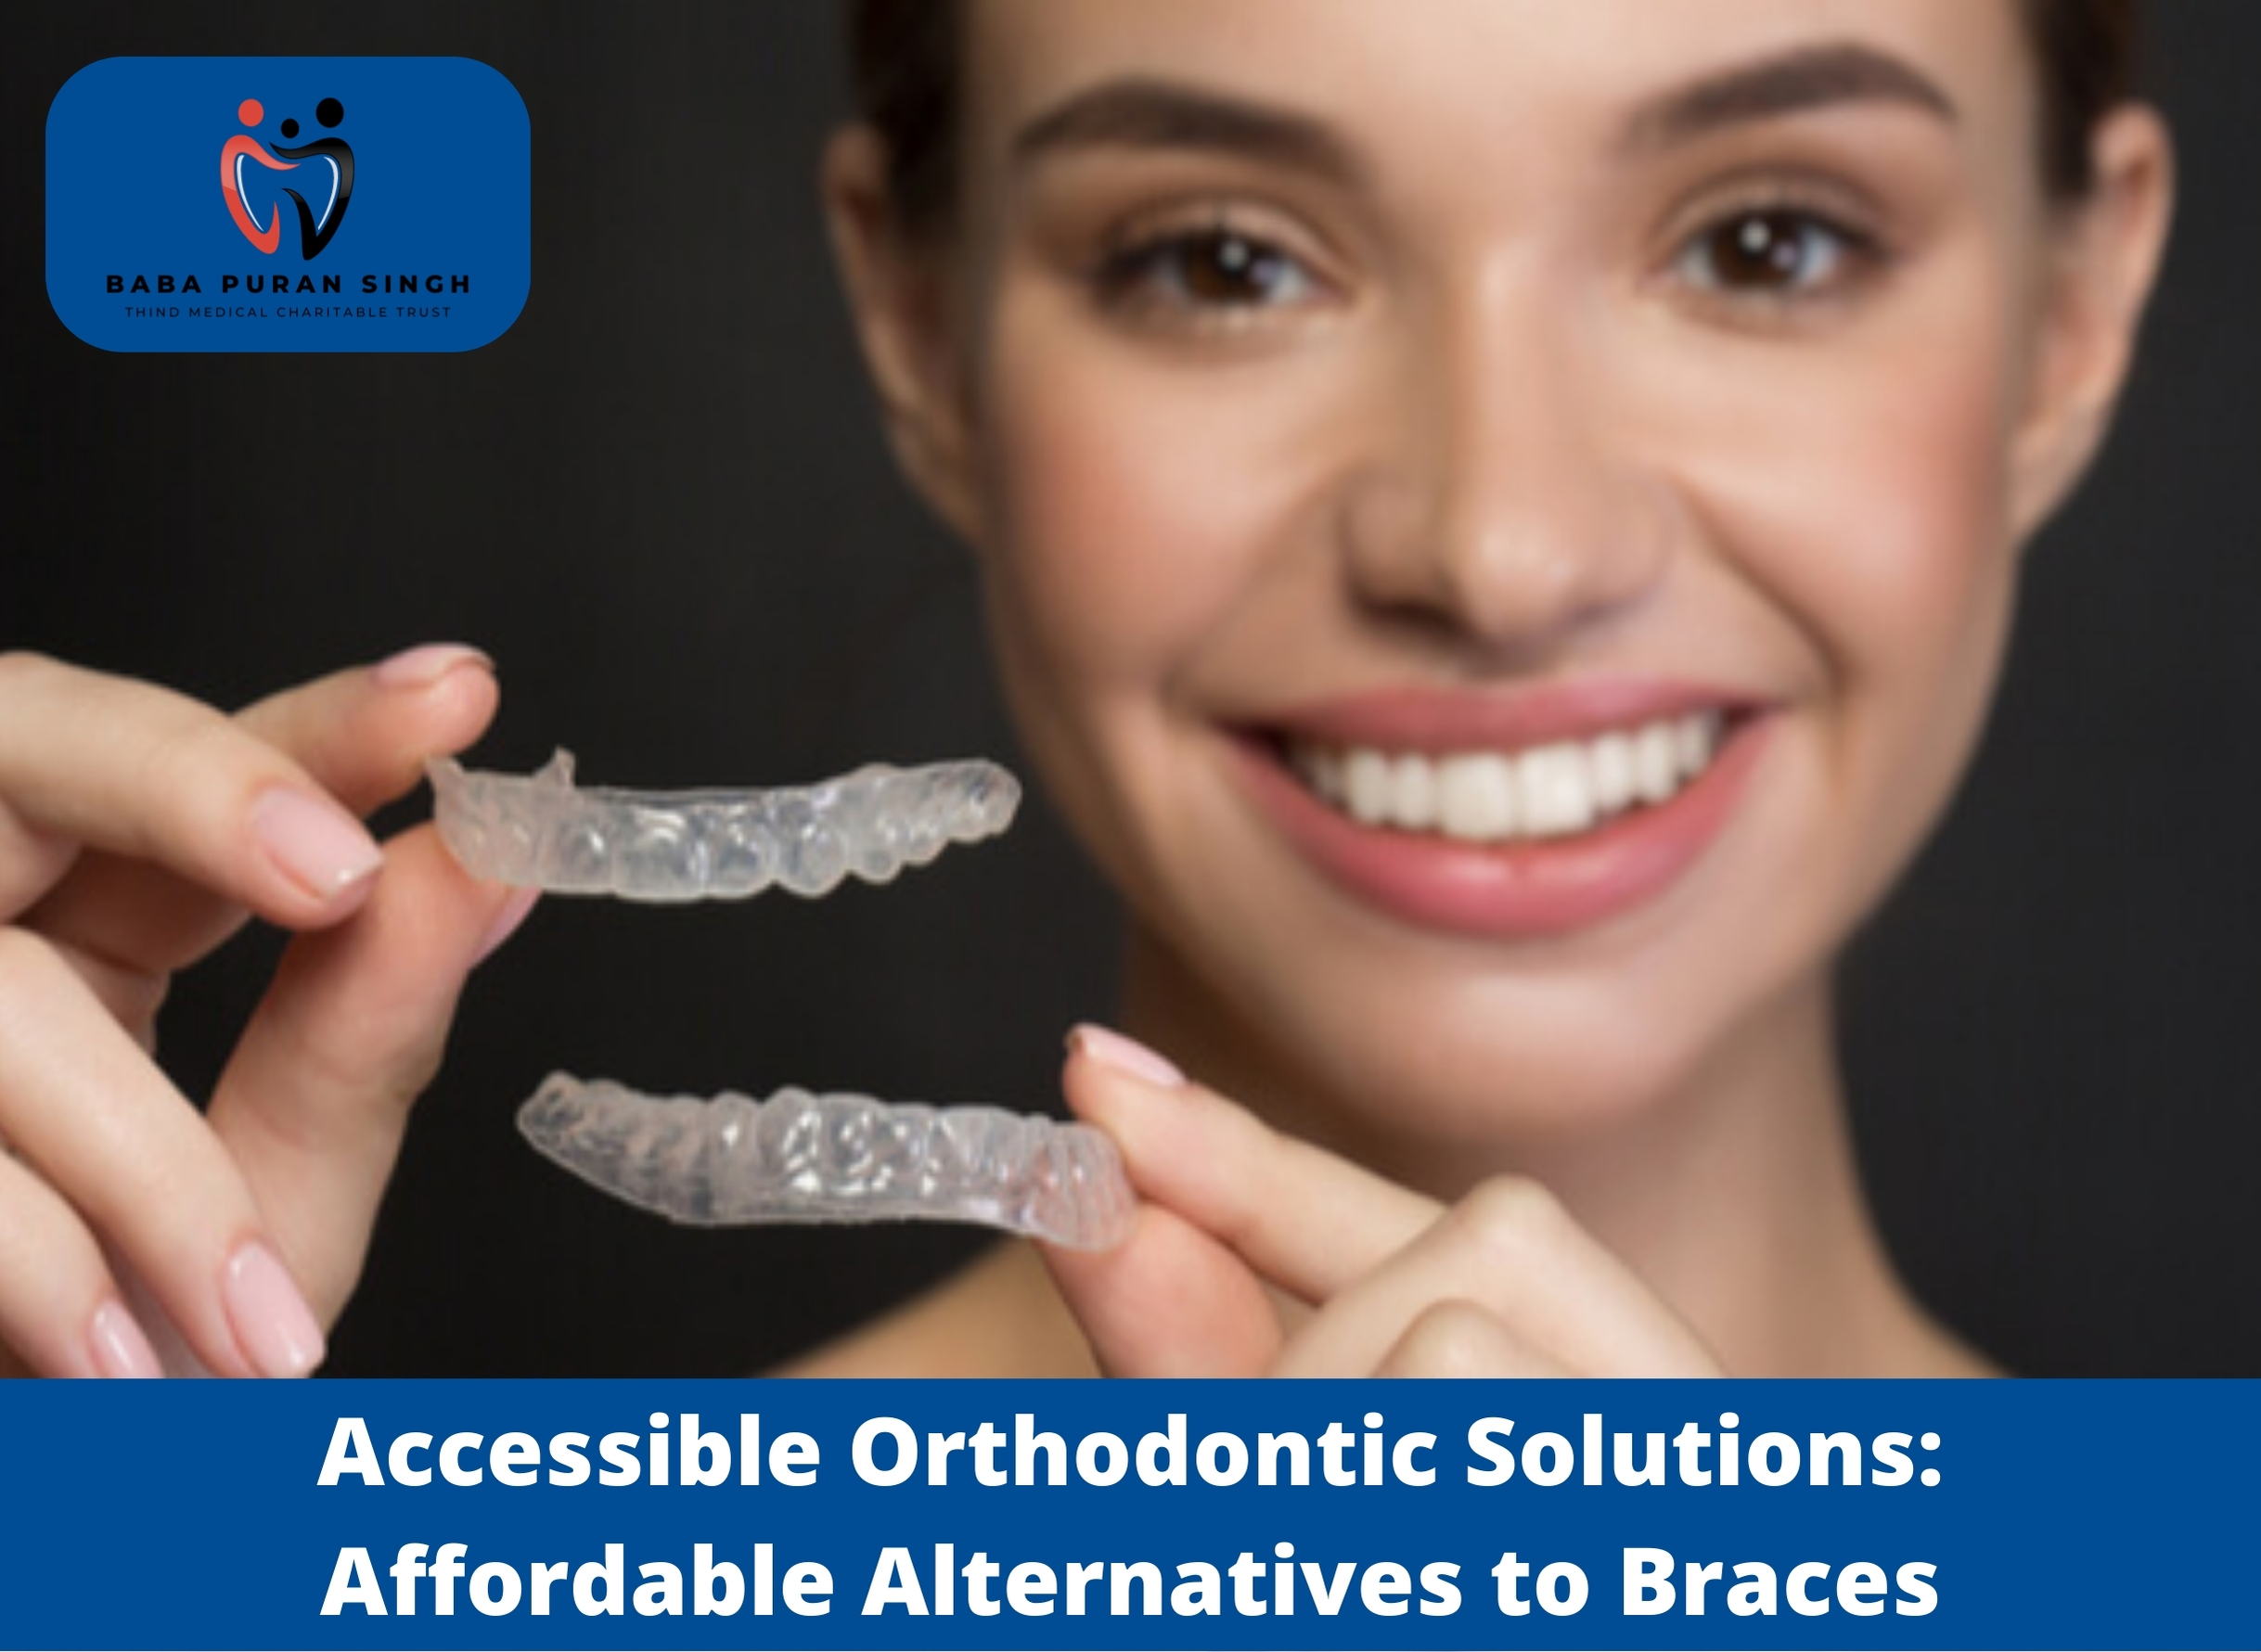 Accessible Orthodontic Solutions: Affordable Alternatives to Braces